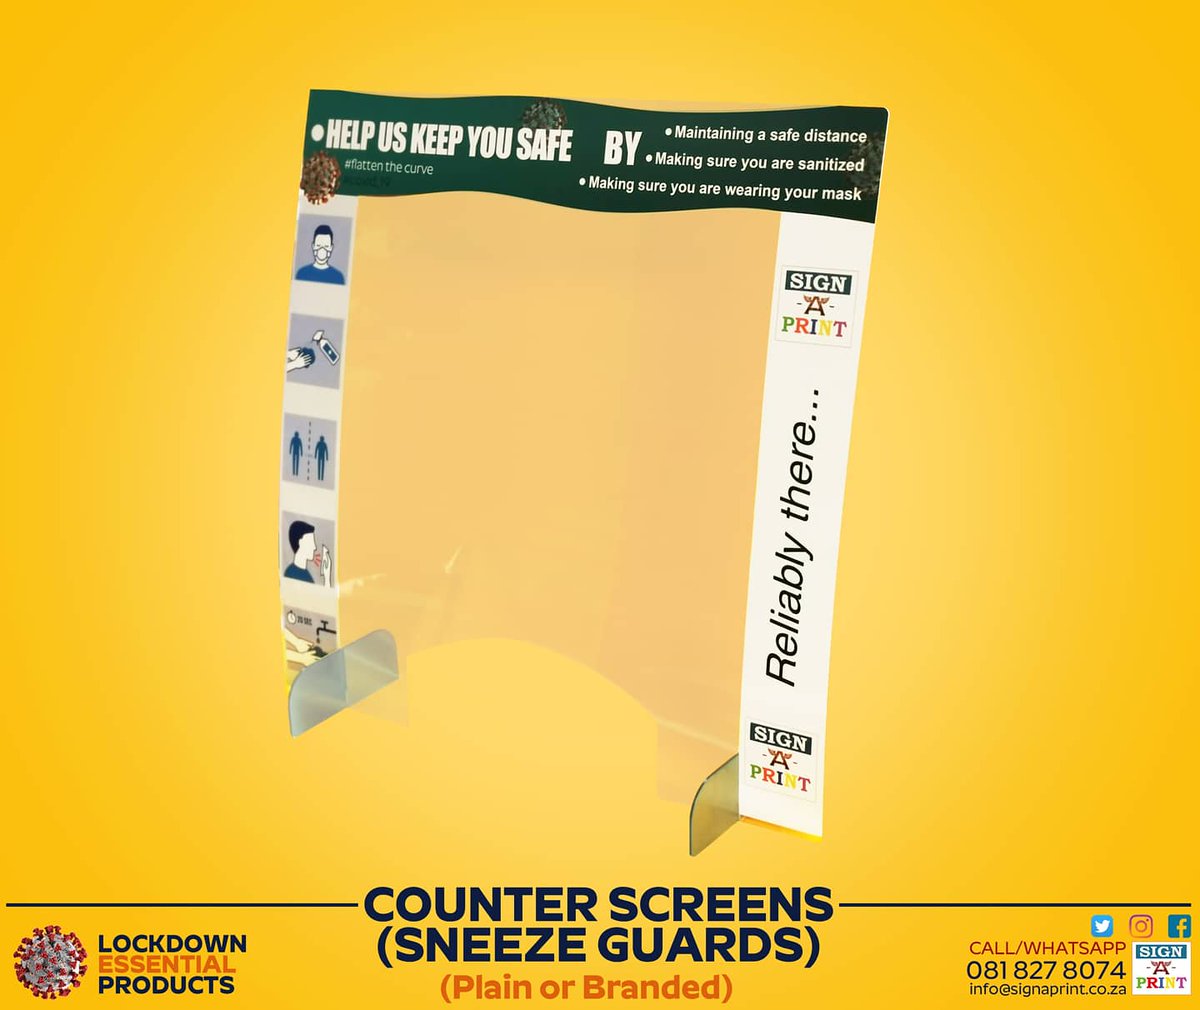 Looking for ways to improve Covid-19 prevention in your office space?

We got you. Order sneeze guard/counter screens and Face shields from us.
📲 081 827 8074
#covid_19prevention
#level4
#safeworkspace